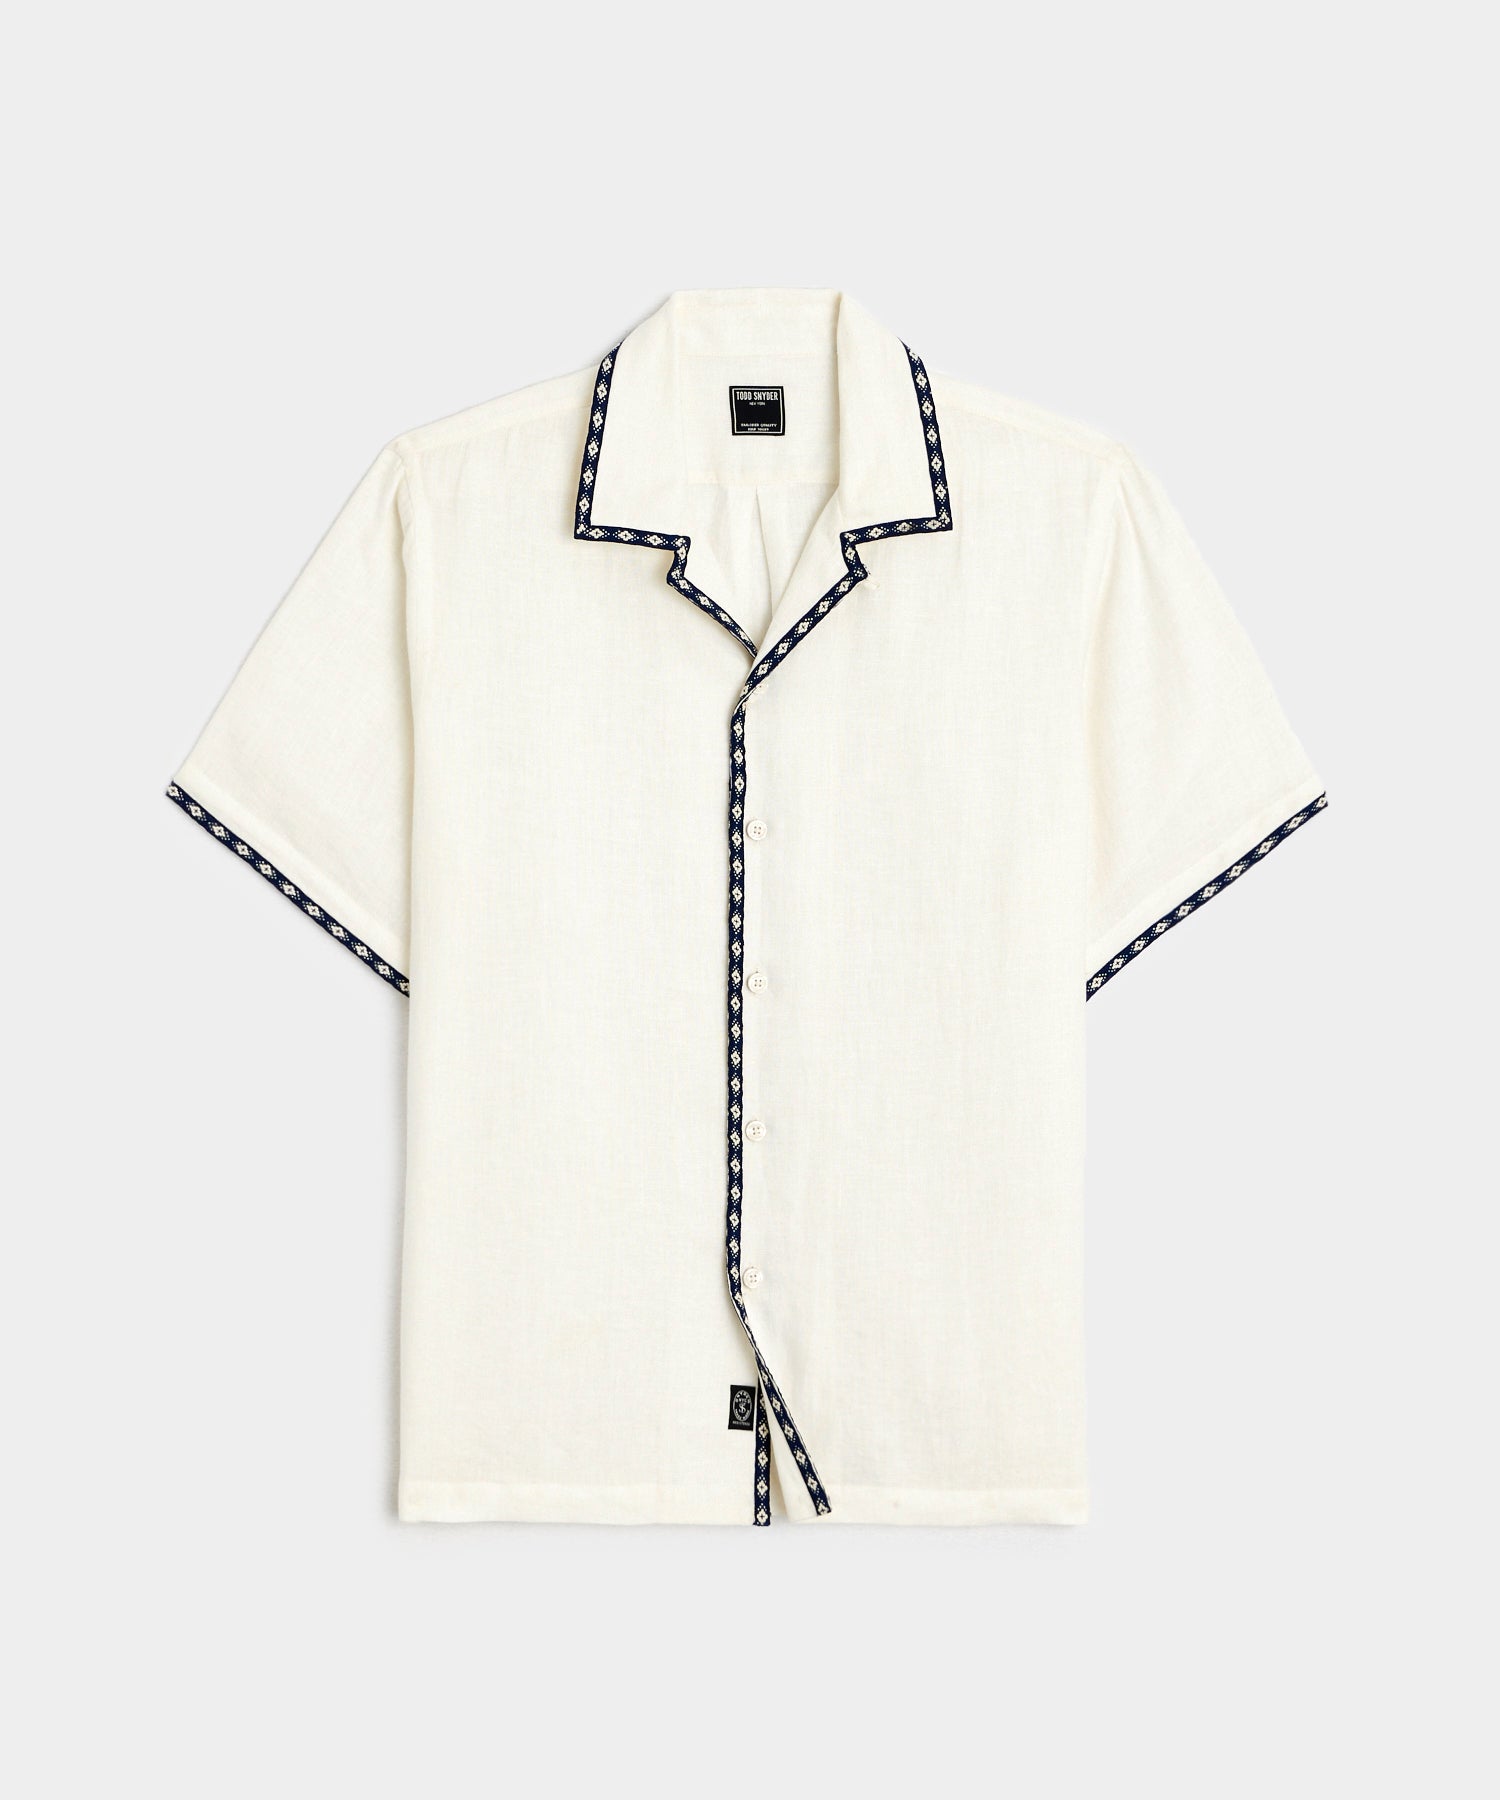 Tipped Embroidered Shirt in White